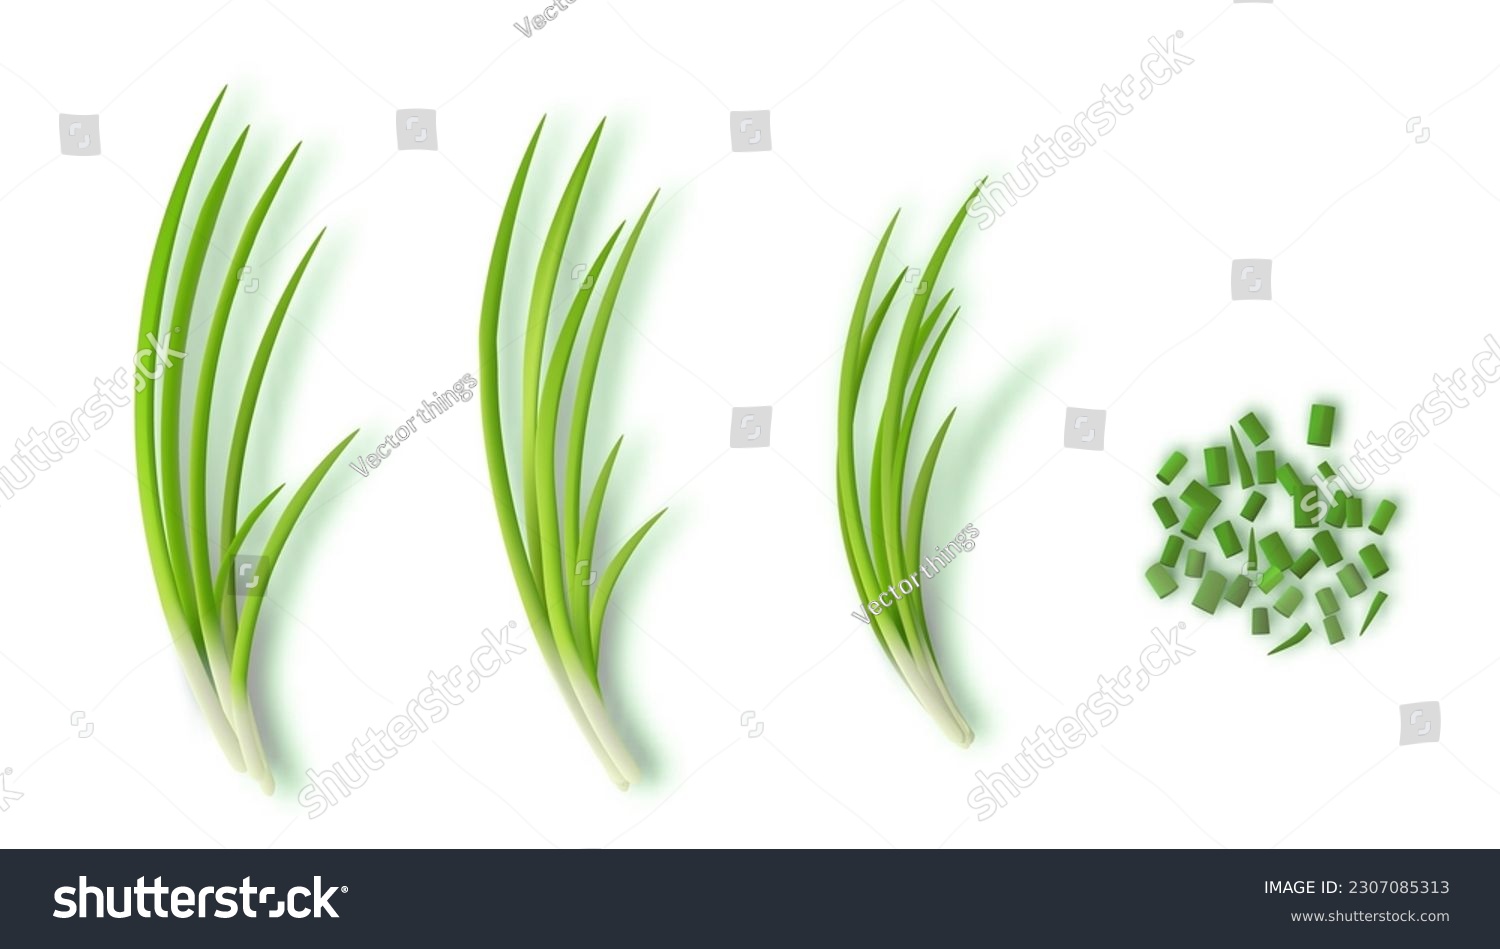 SVG of Young Green Onion Bunch And Sliced One Isolated On White Background. EPS10 Vector svg